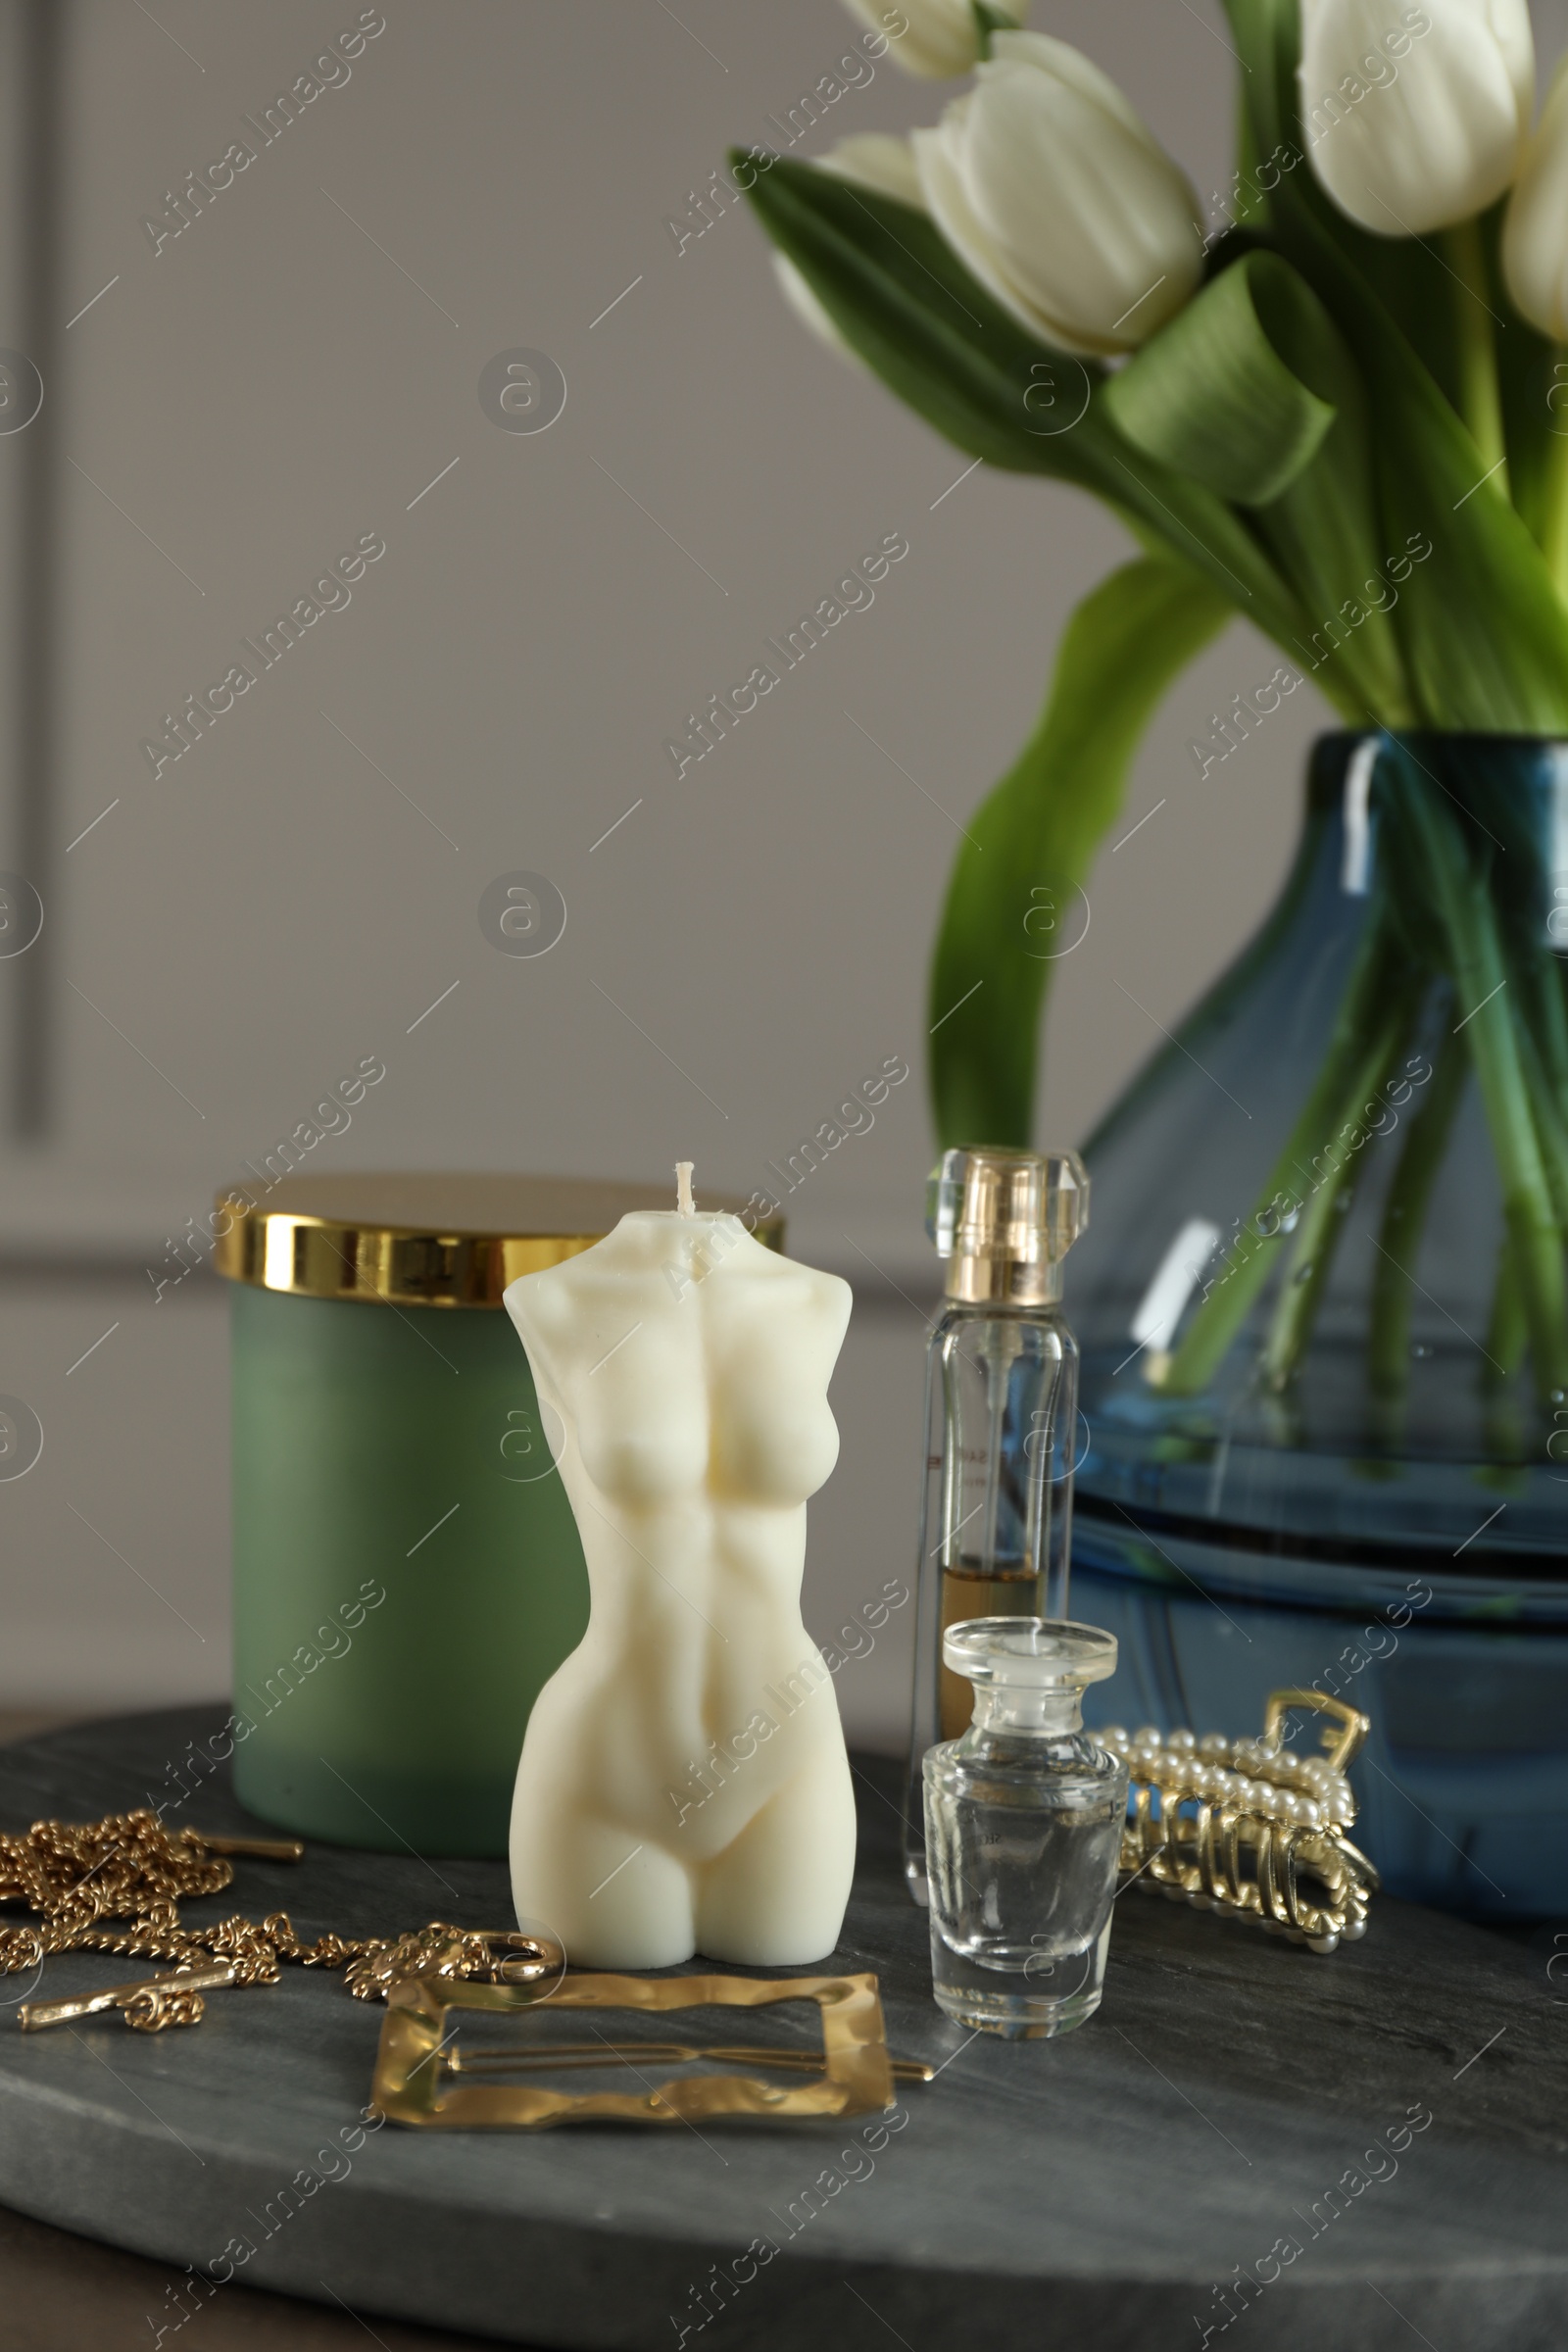 Photo of Beautiful female body shape candle, flowers and decor on table